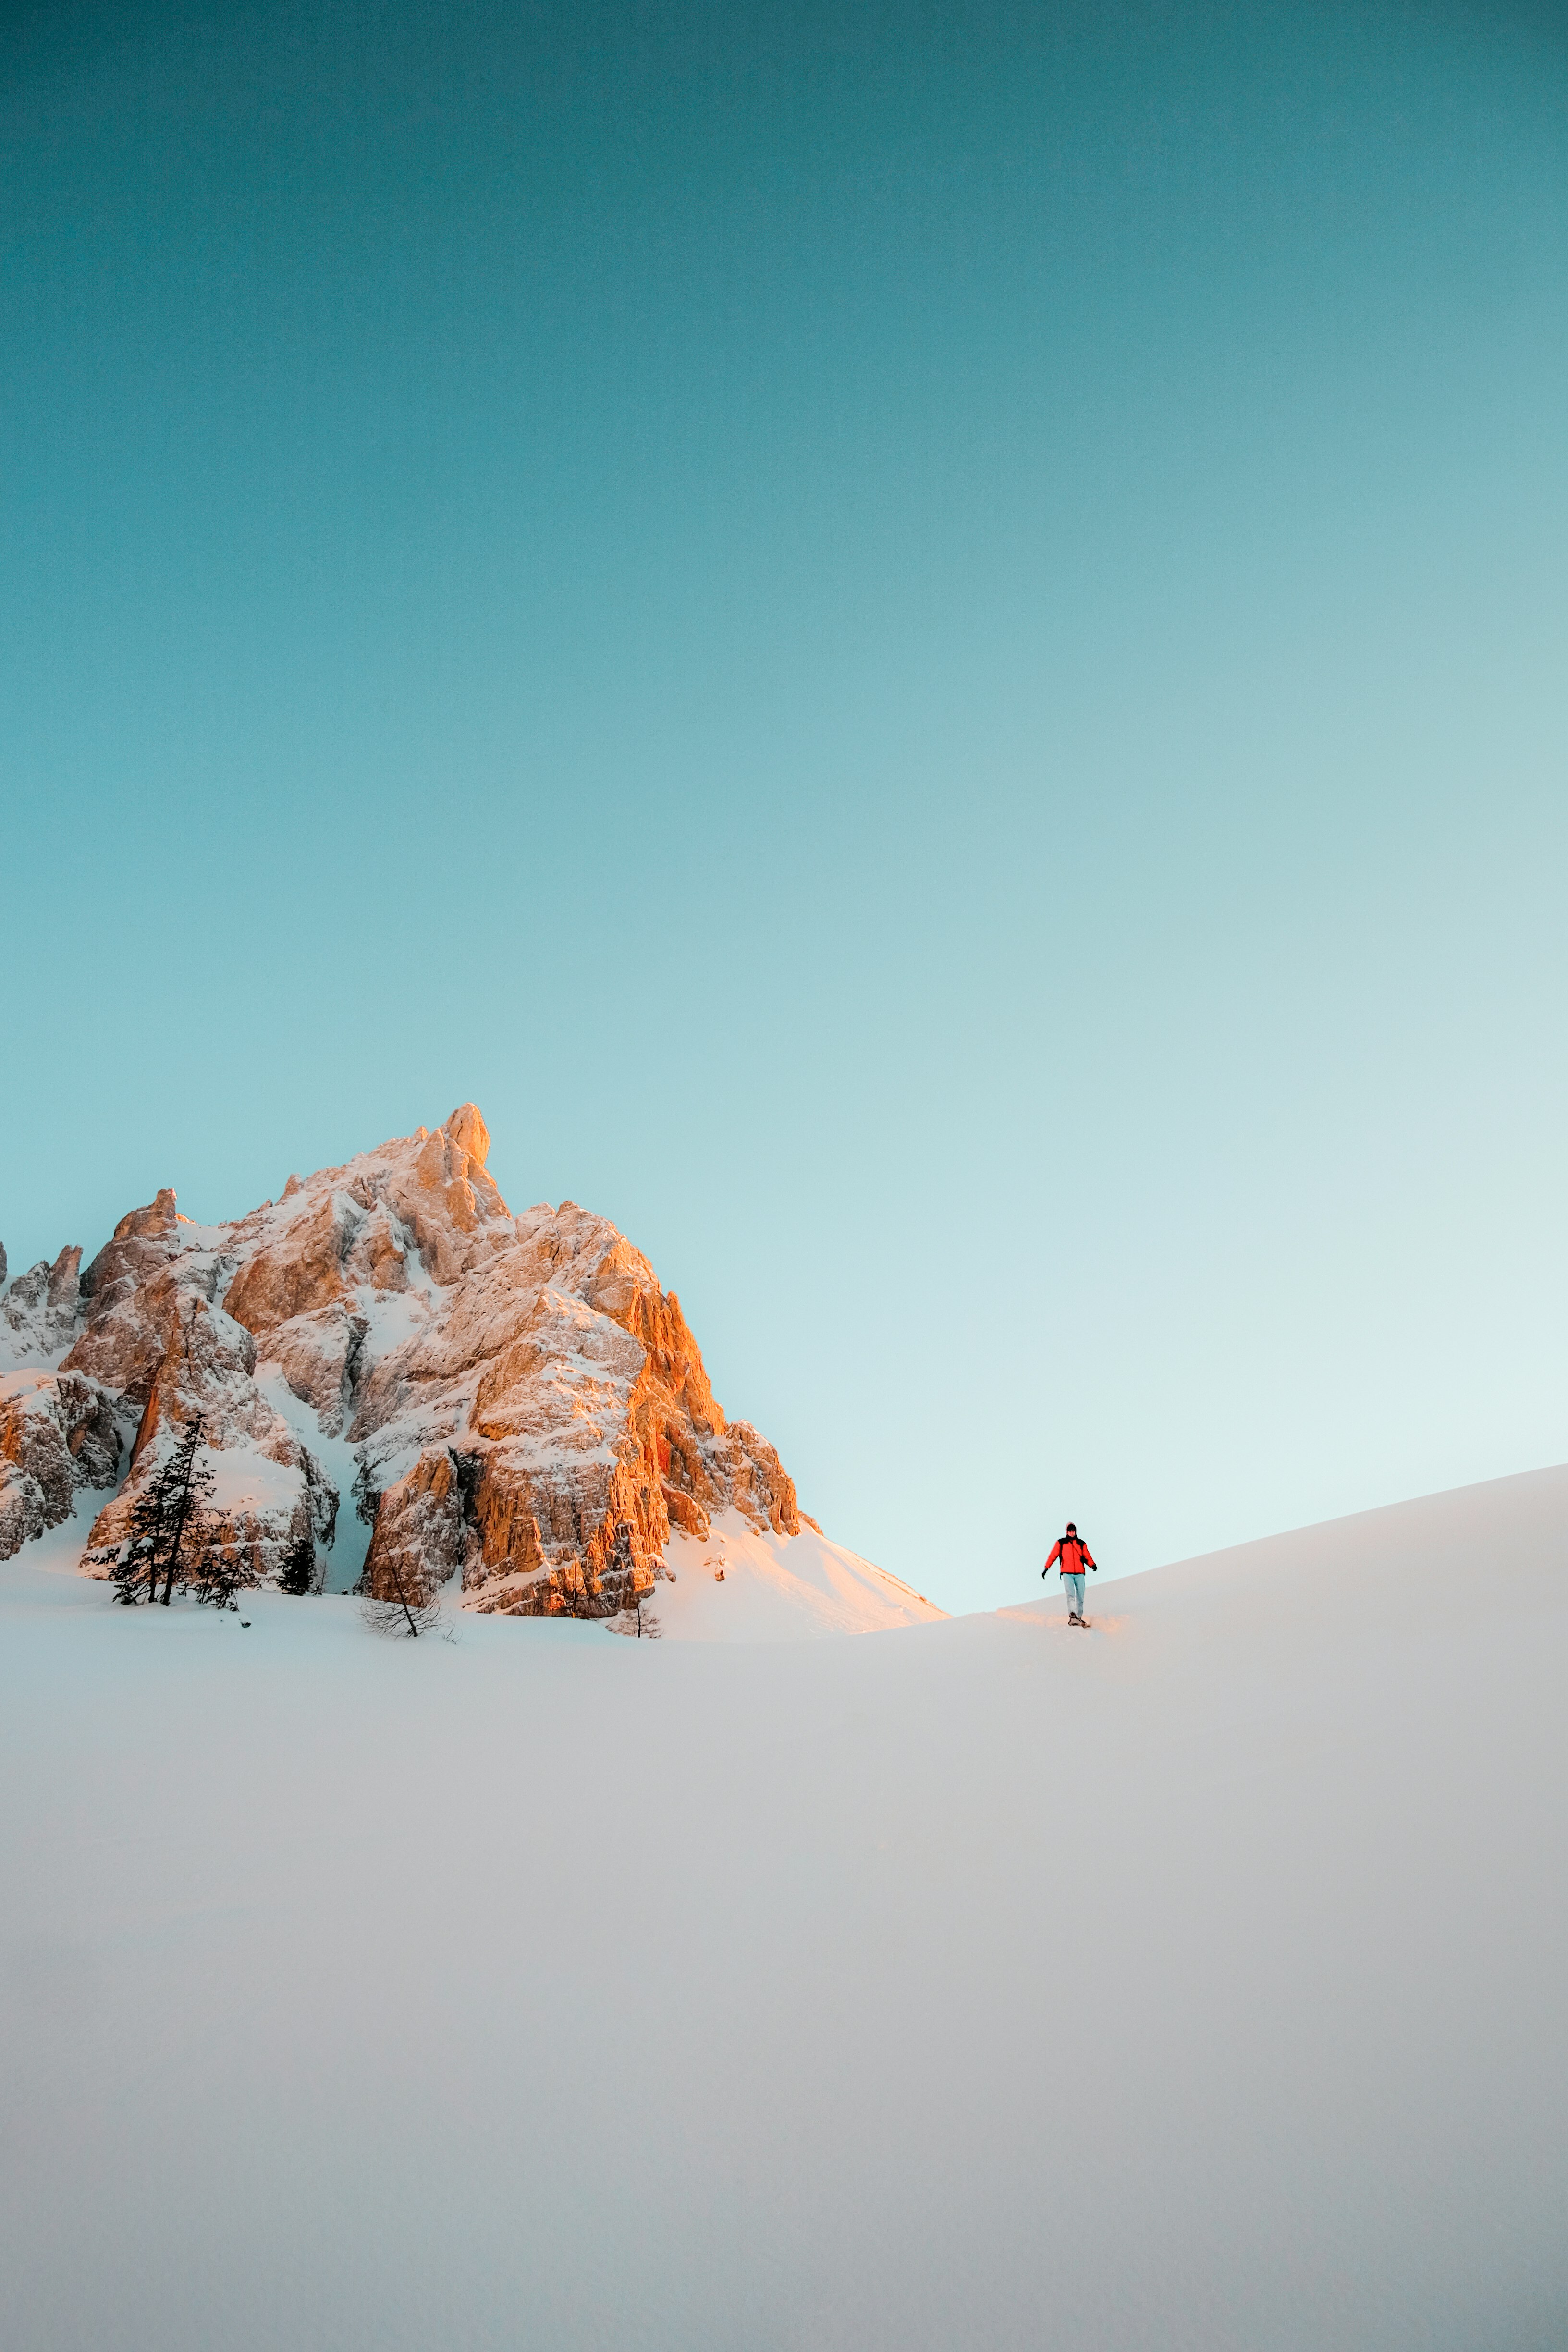 person in red jacket walking on snow covered ground during daytime